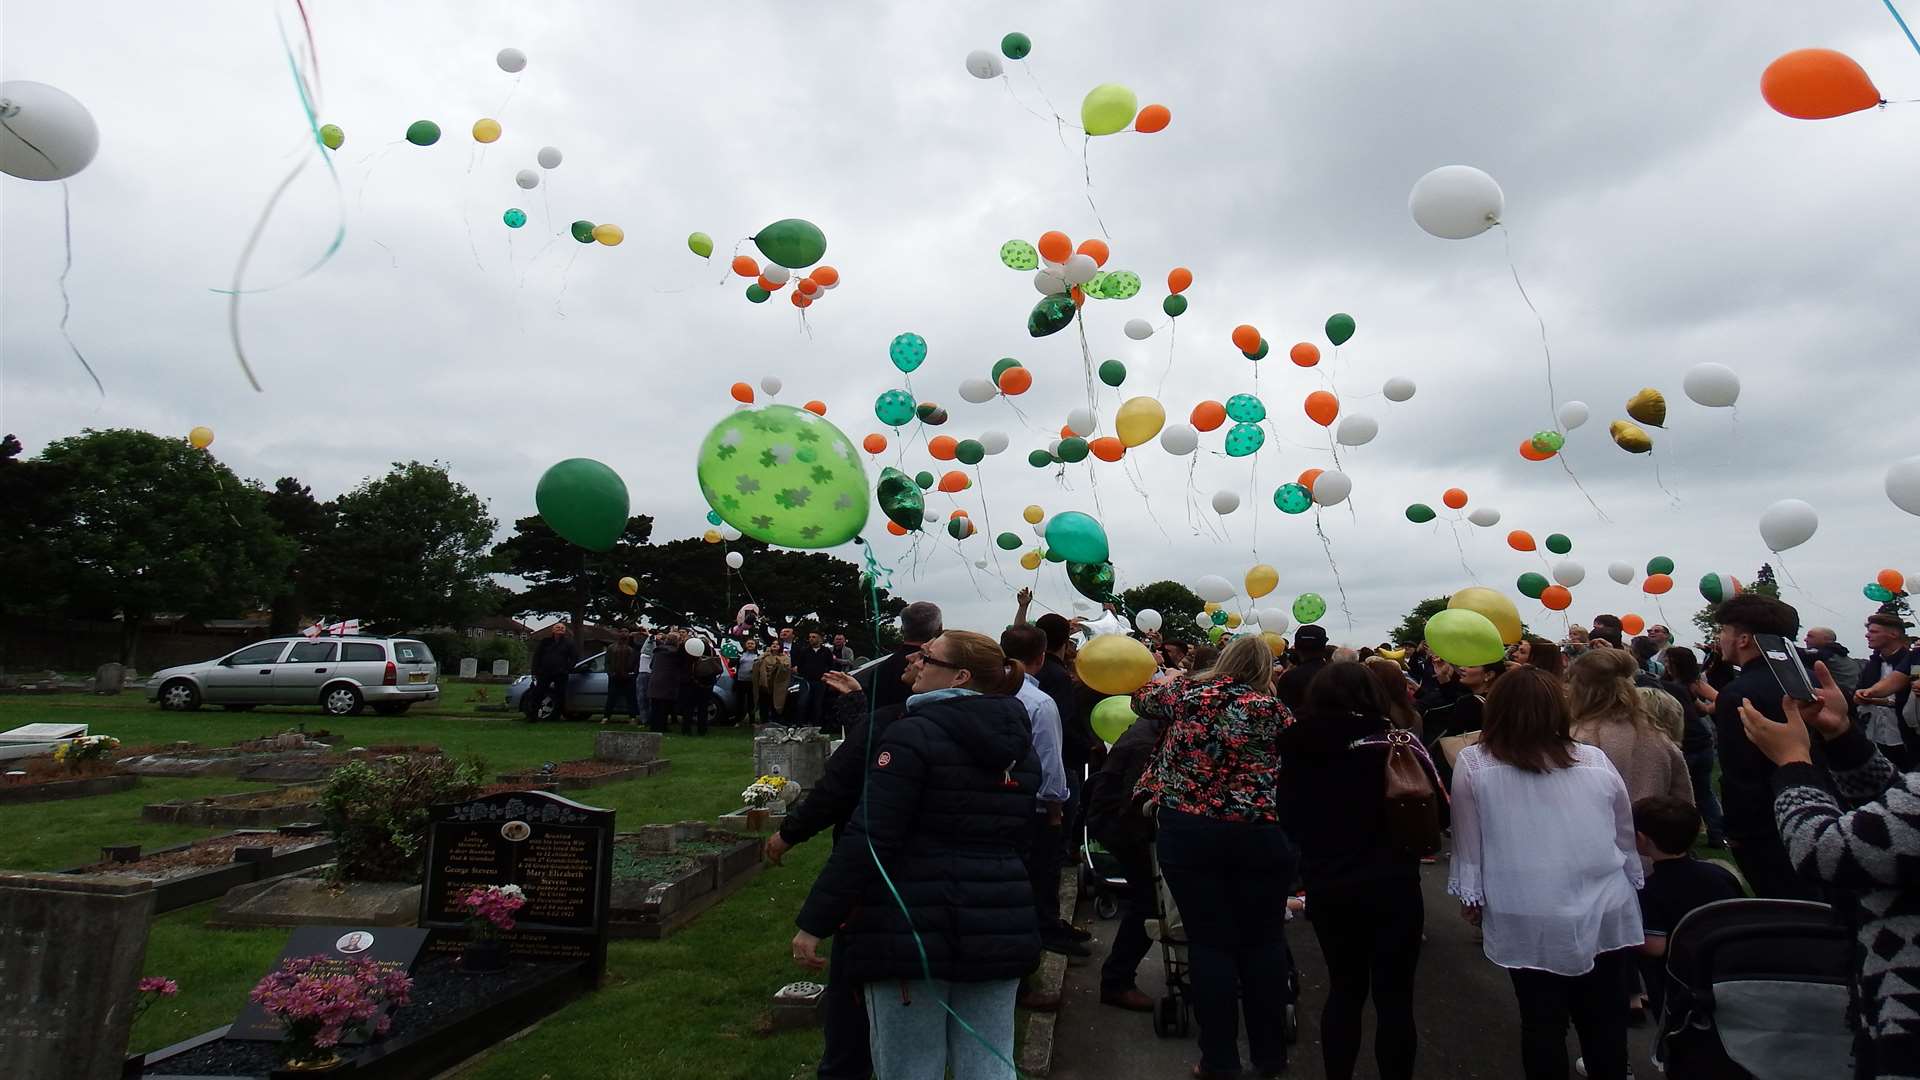 Hundreds of orange, white and green balloons were released